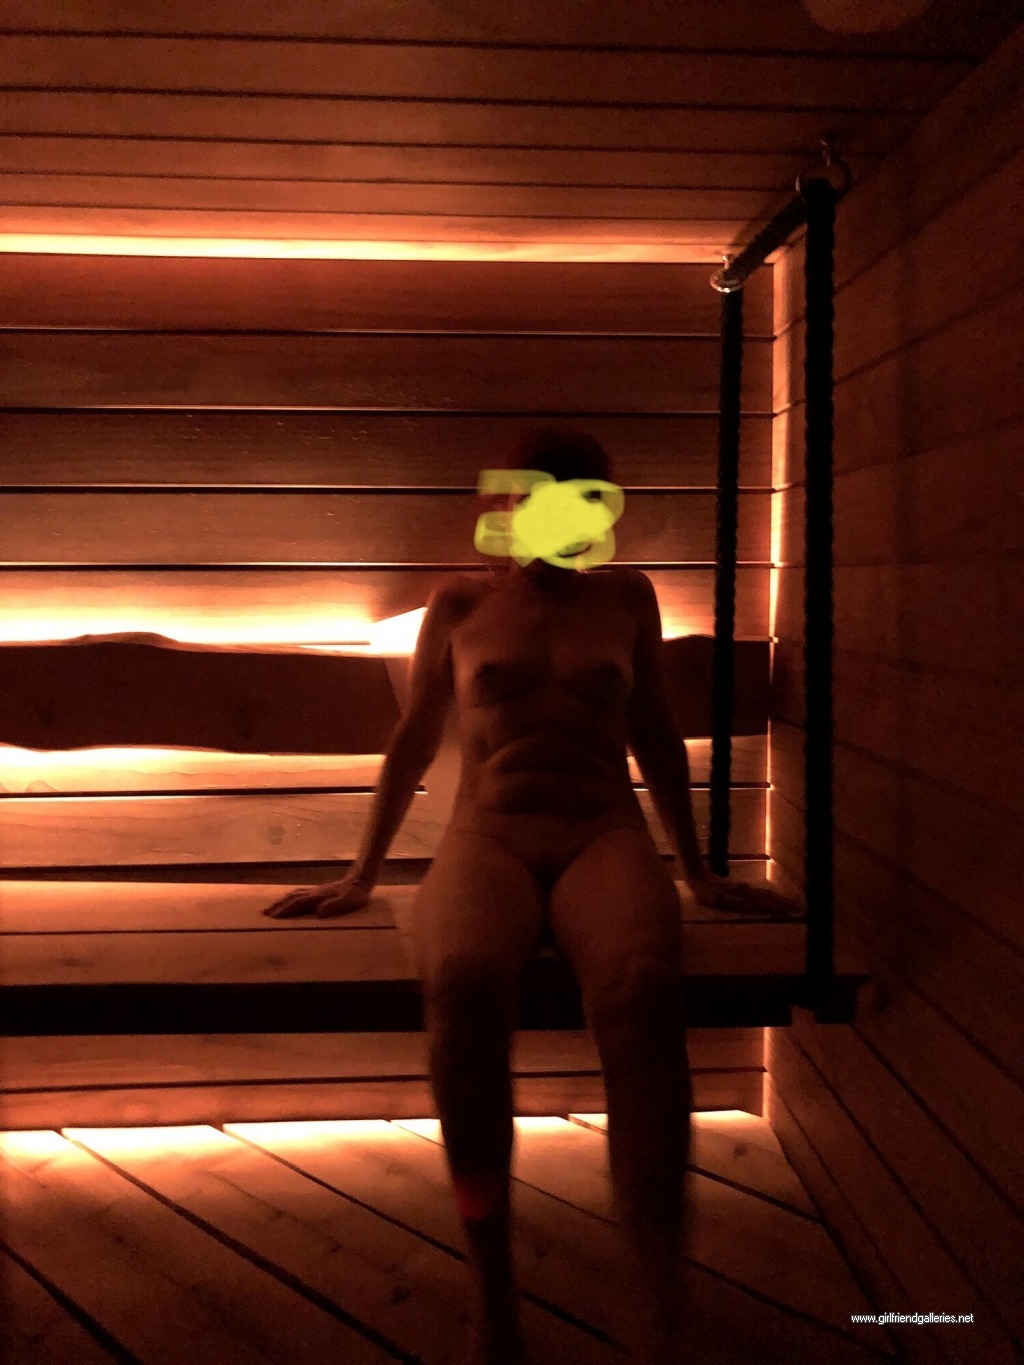 Time for sauna